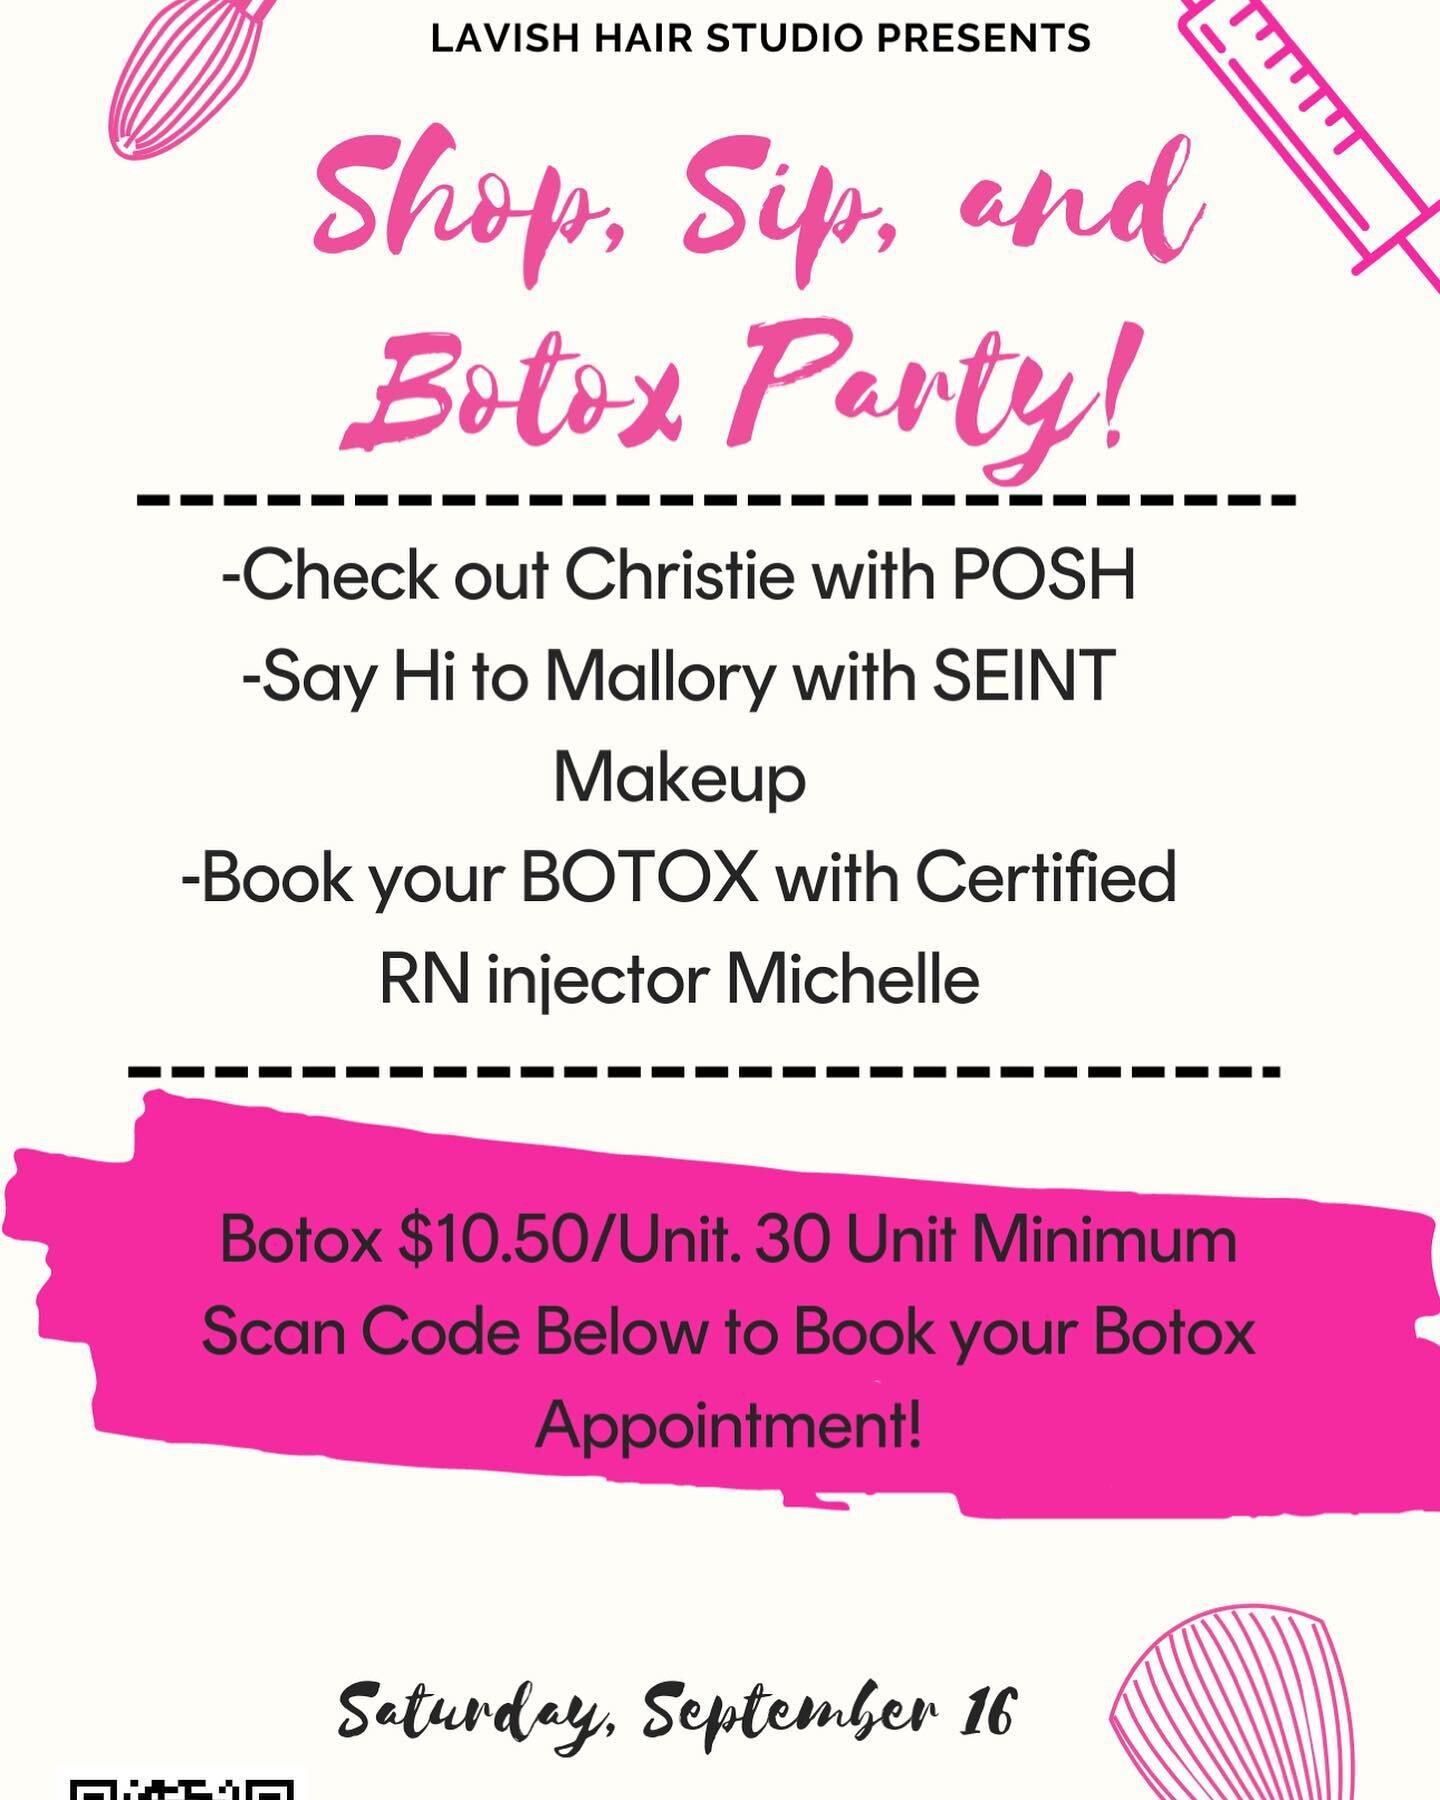 We are having a Botox party this Saturday, the 16th staring at 10 am. Link for booking the botox will be in comments.